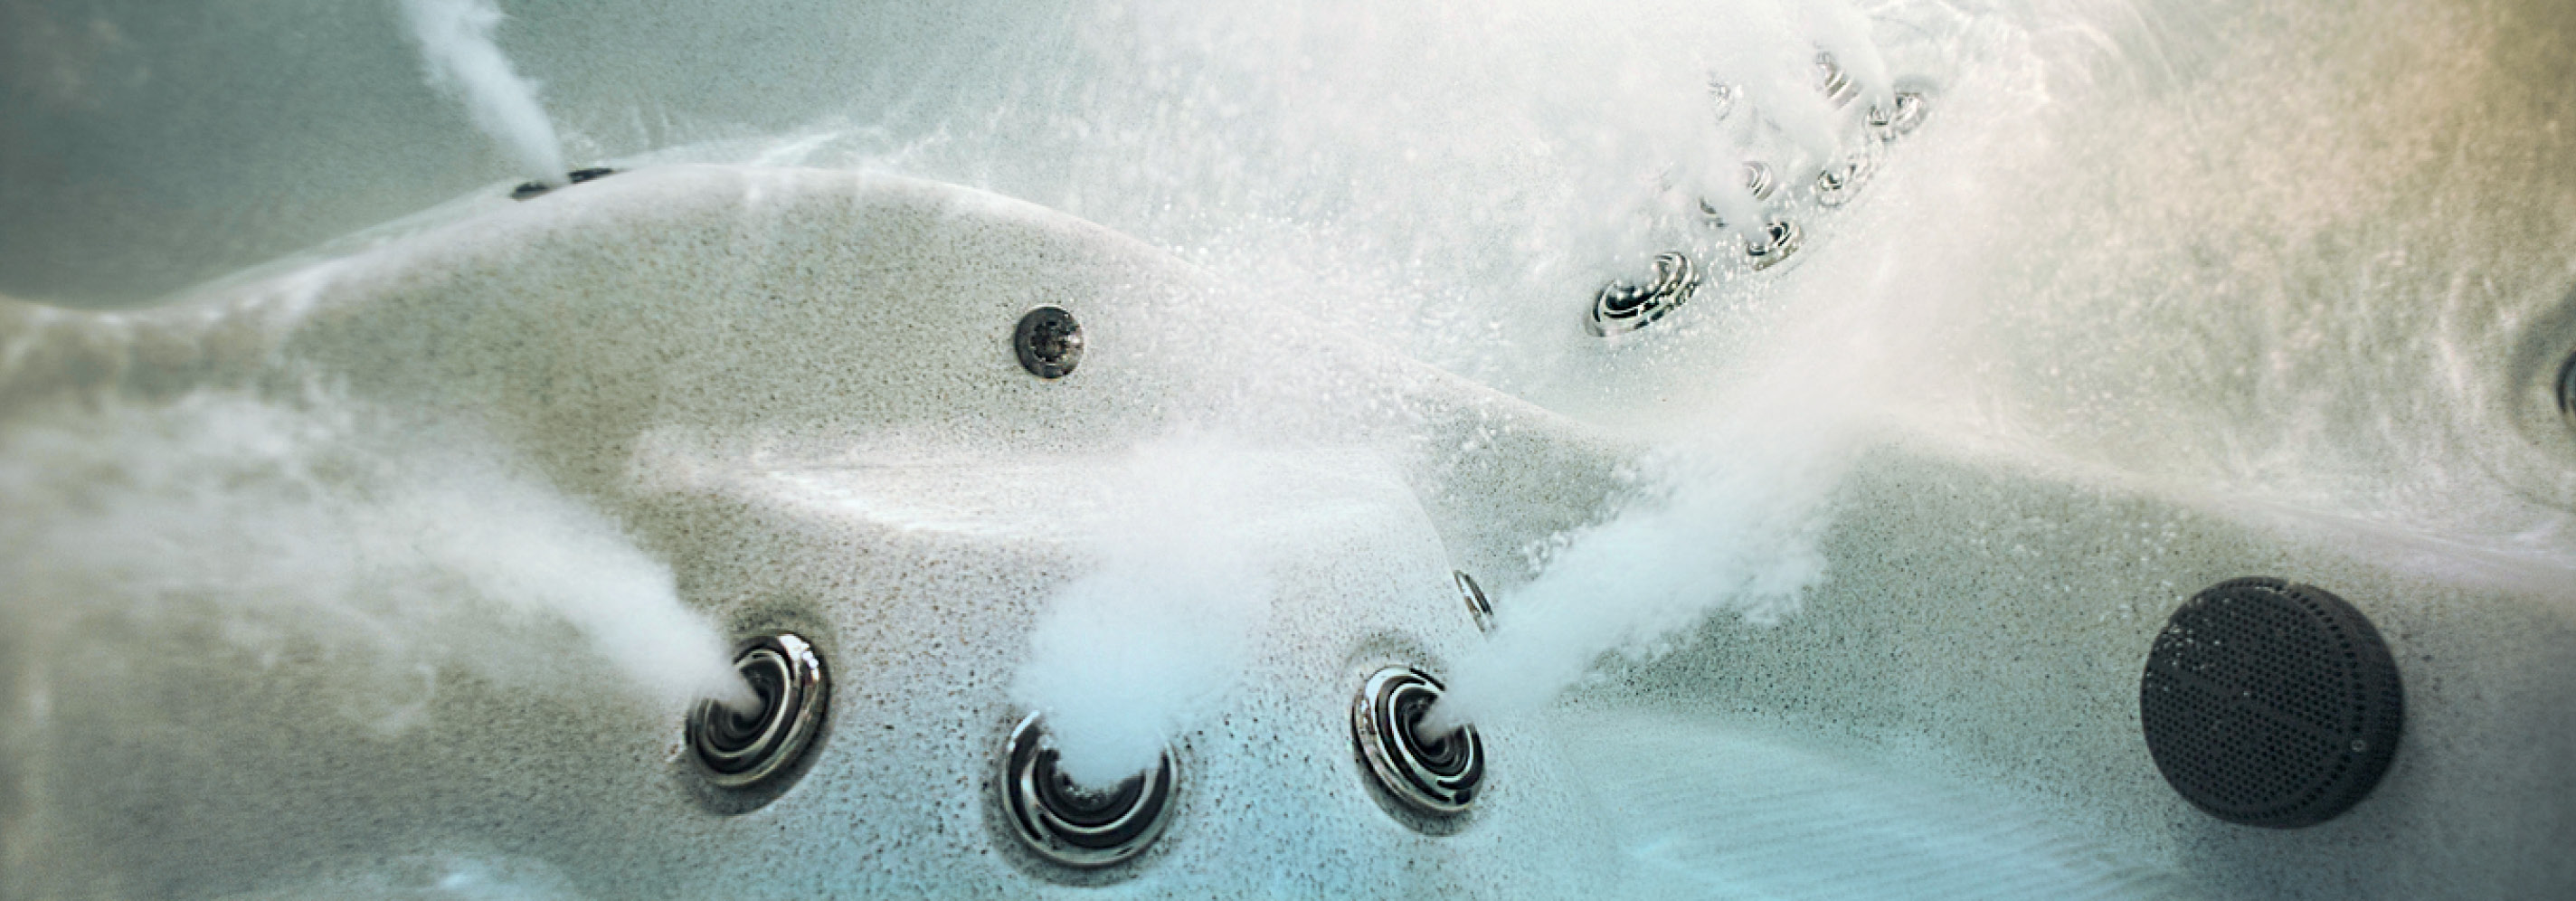 underwater image of the jets in a hot tub